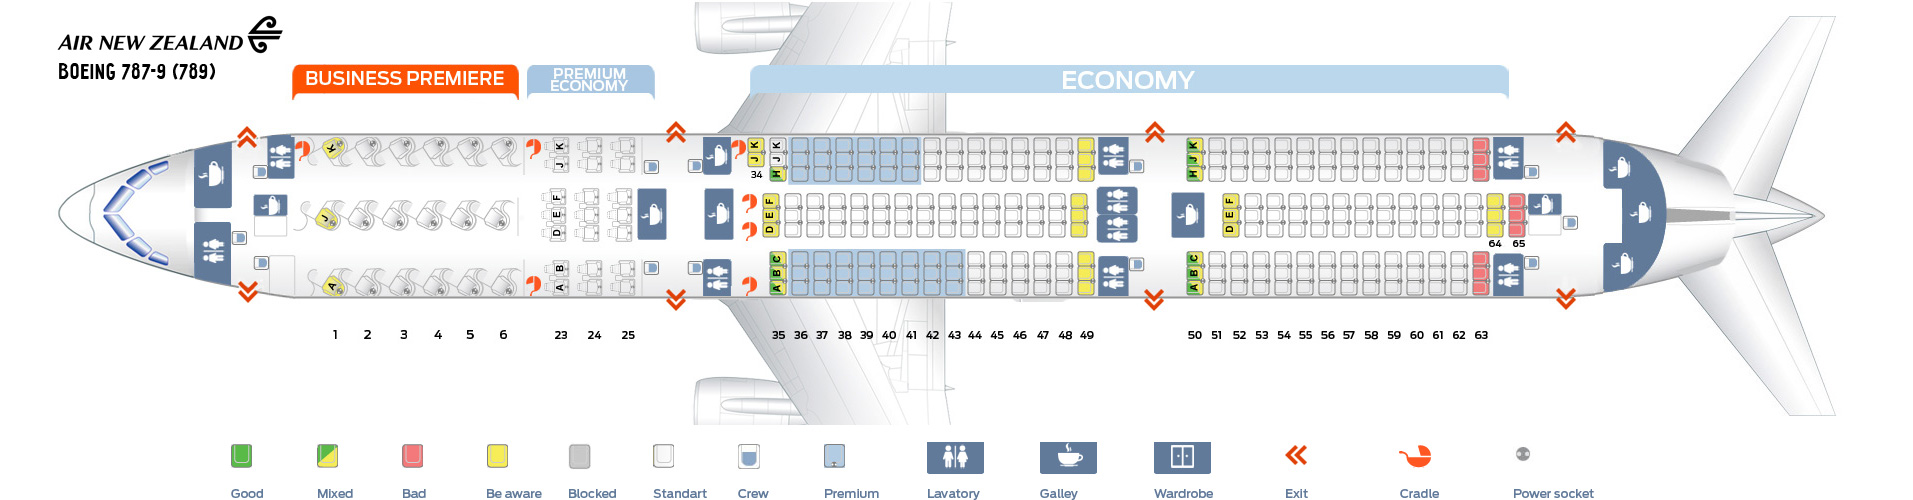 Seat map Boeing 787-9 Dreamliner Air New Zealand. Best seats in the plane